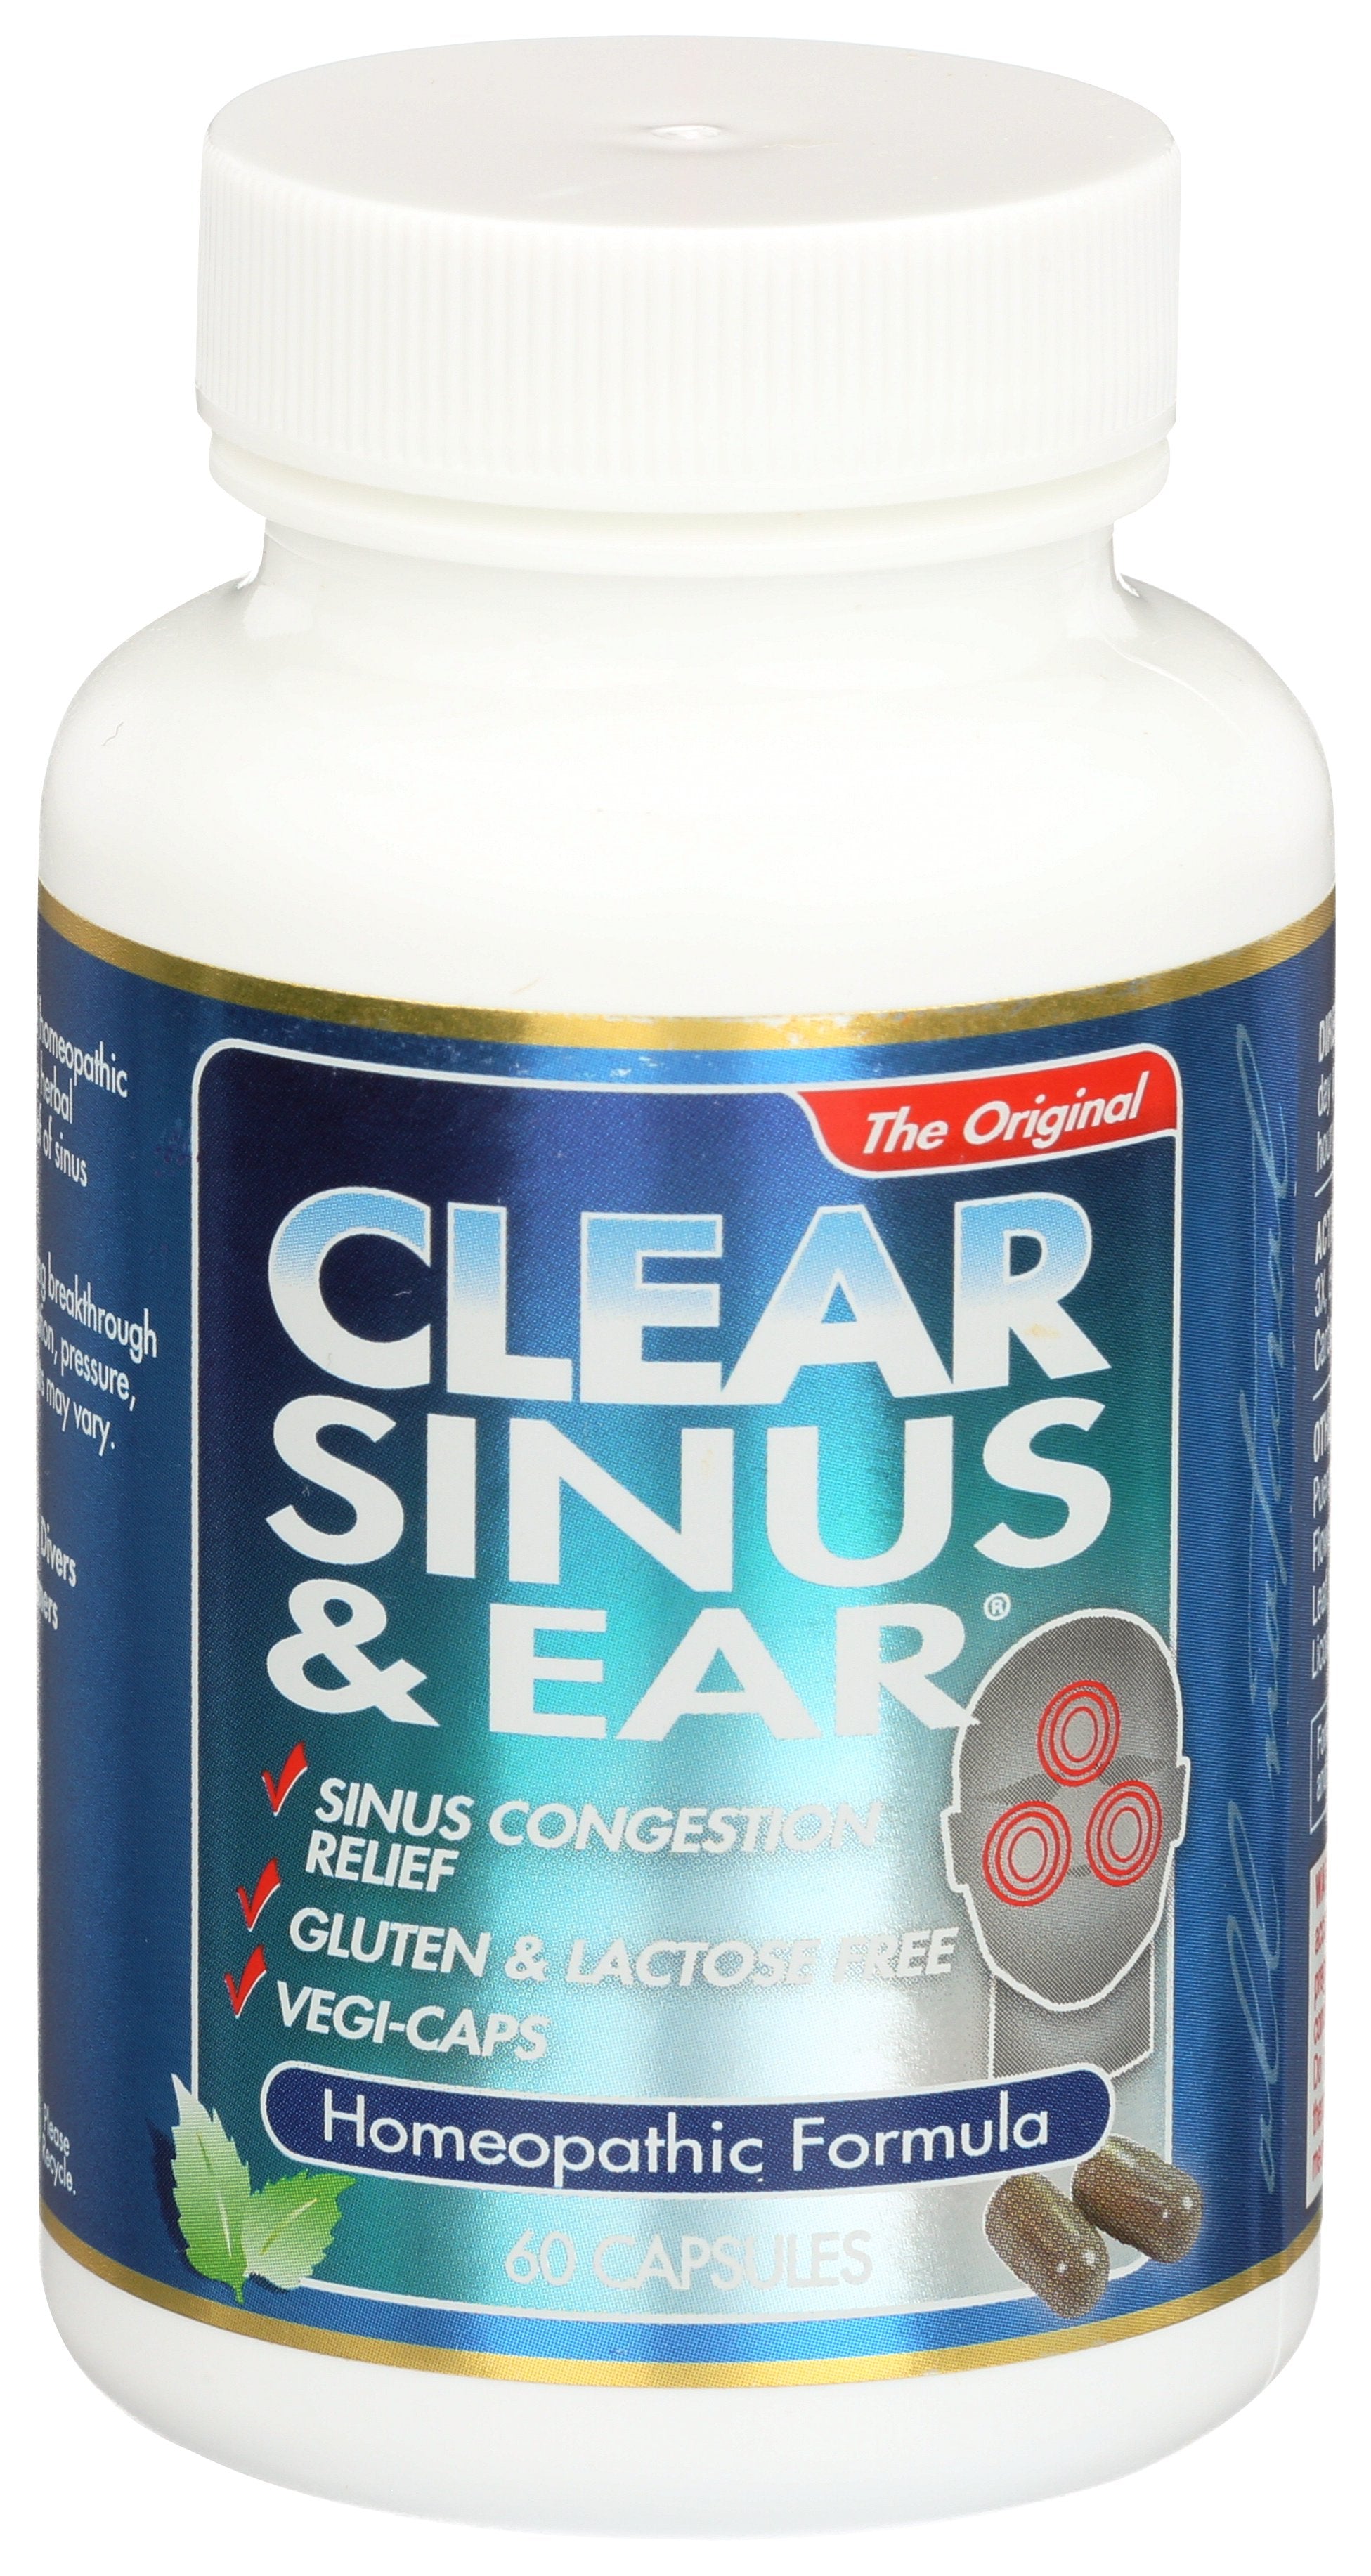 CLEAR PRODUCTS CLEAR SINUS & EAR - Case of 3